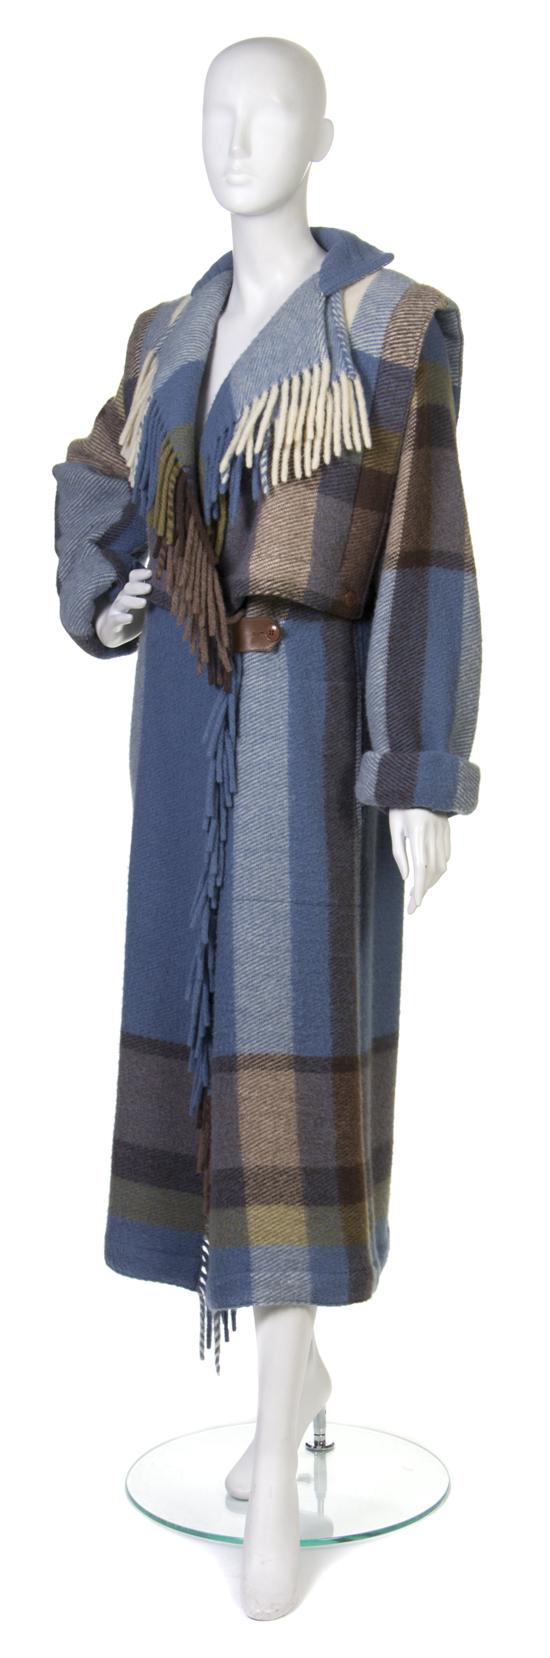 A Multicolor Plaid Wool Coat probably 155a5b